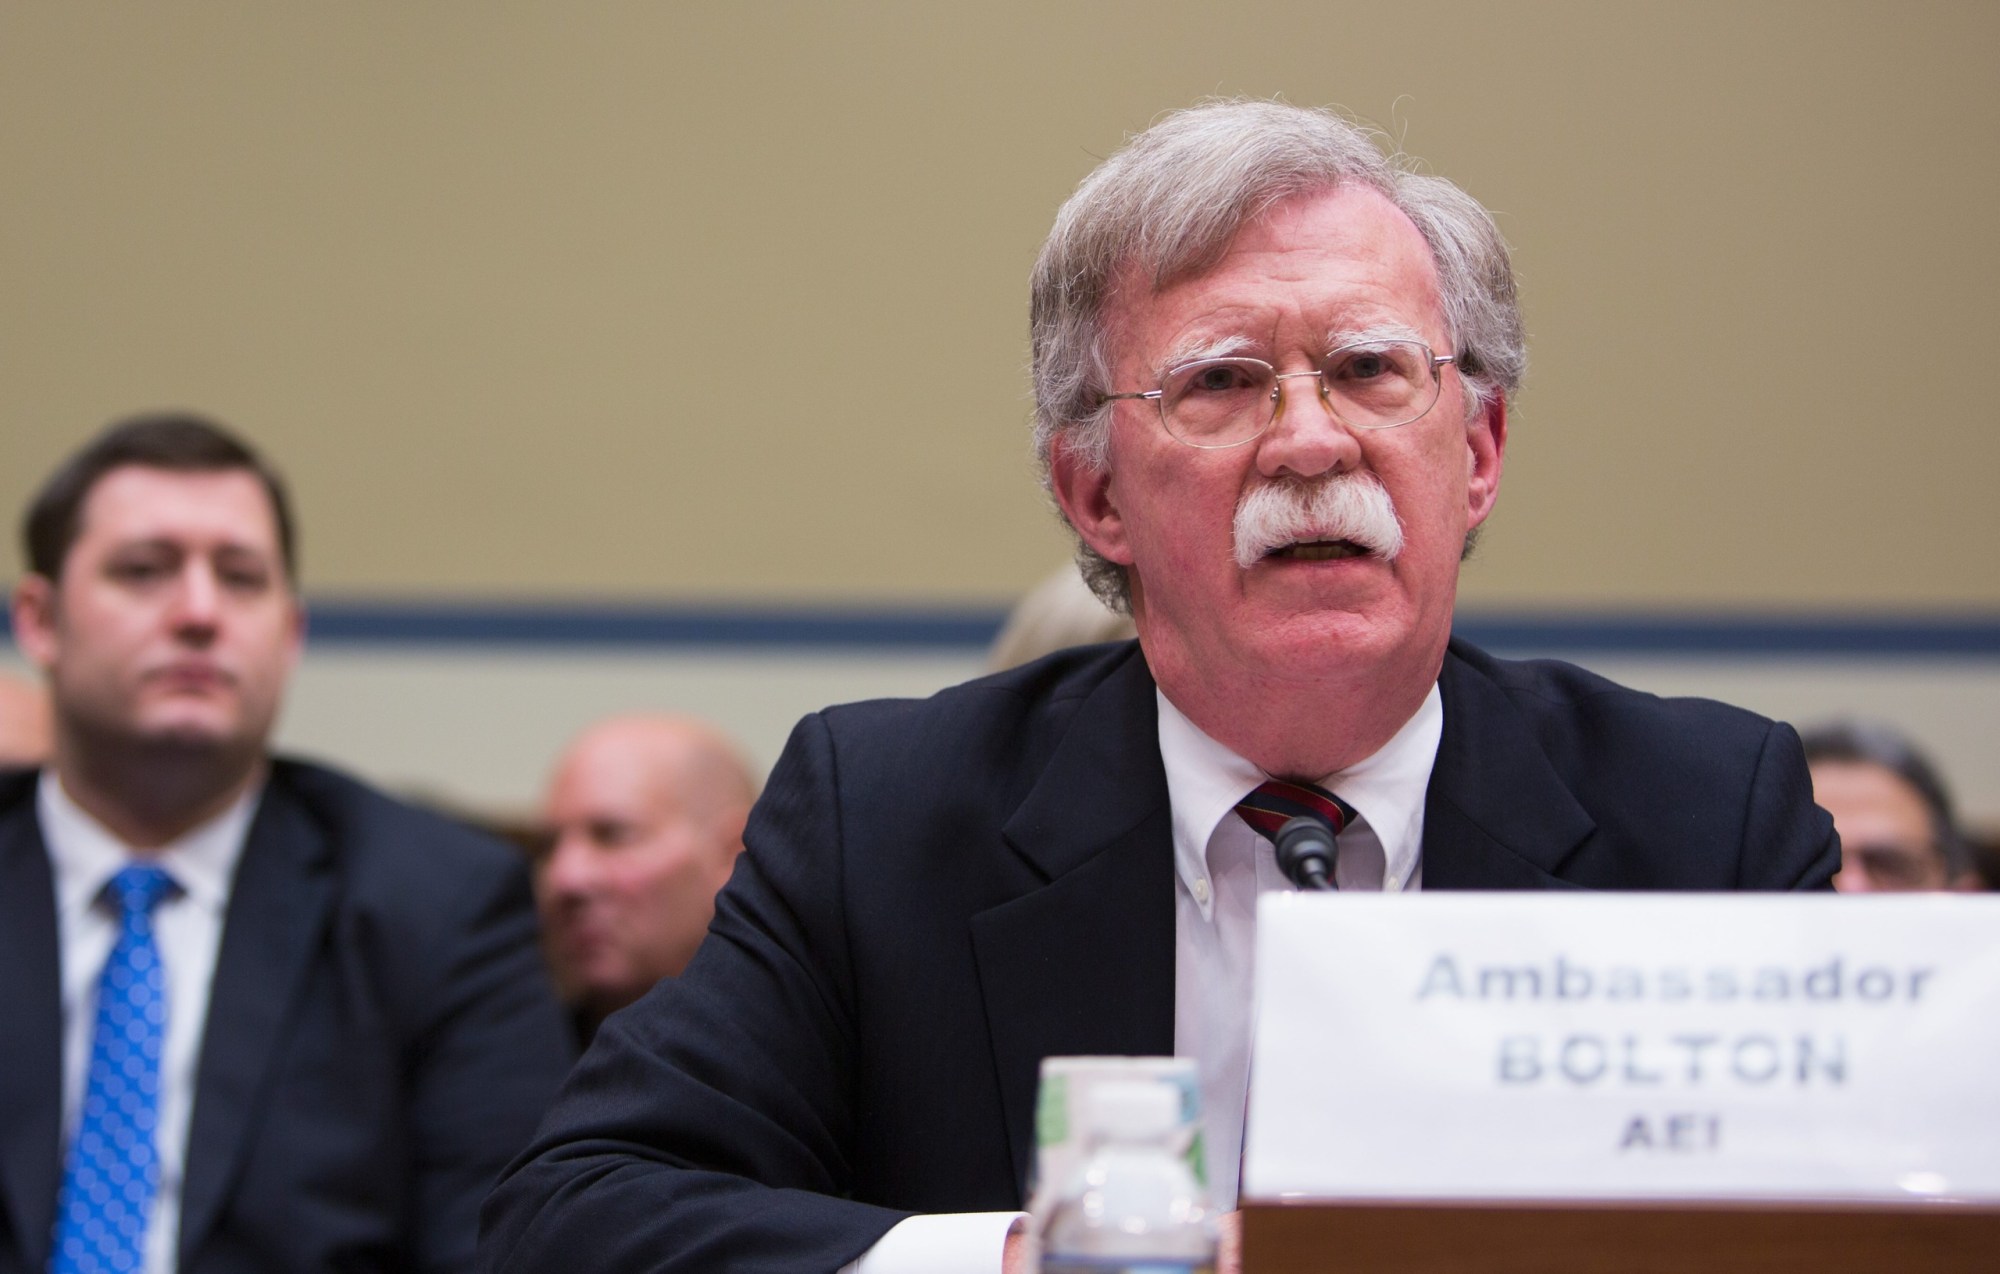 John Bolton speaks at the House National Oversight and Government Reform Committee on November 8, 2017, in Washington, D.C. (Getty/Tasos Katopodis)